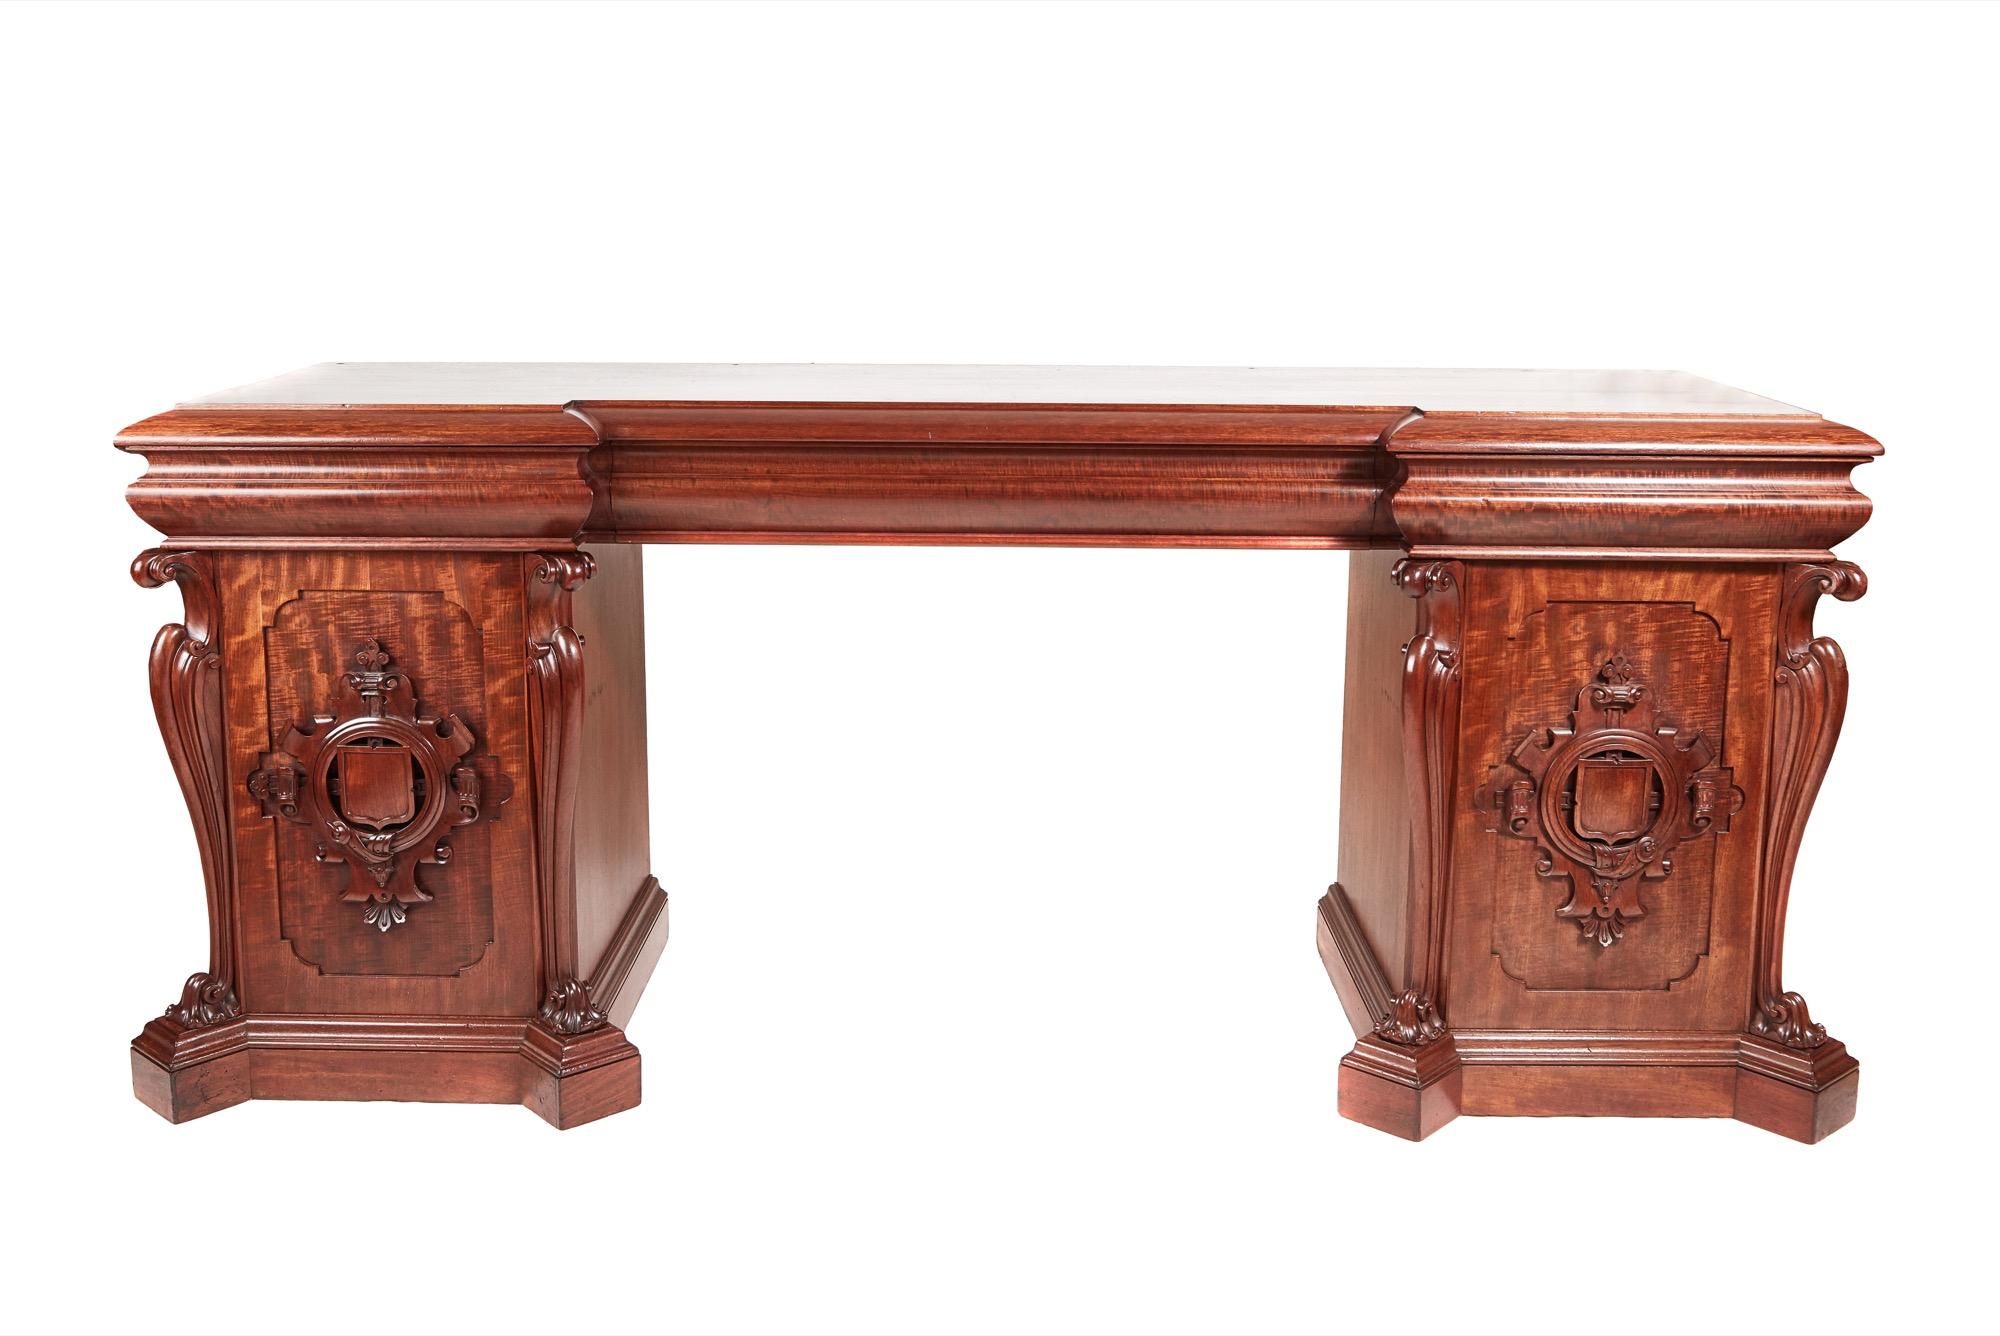 Large outstanding quality William IV antique carved mahogany sideboard with an exquisite flame mahogany inverted breakfront top with three shaped drawers to the frieze, supported by two carved mahogany cupboards with paneled doors and fabulous